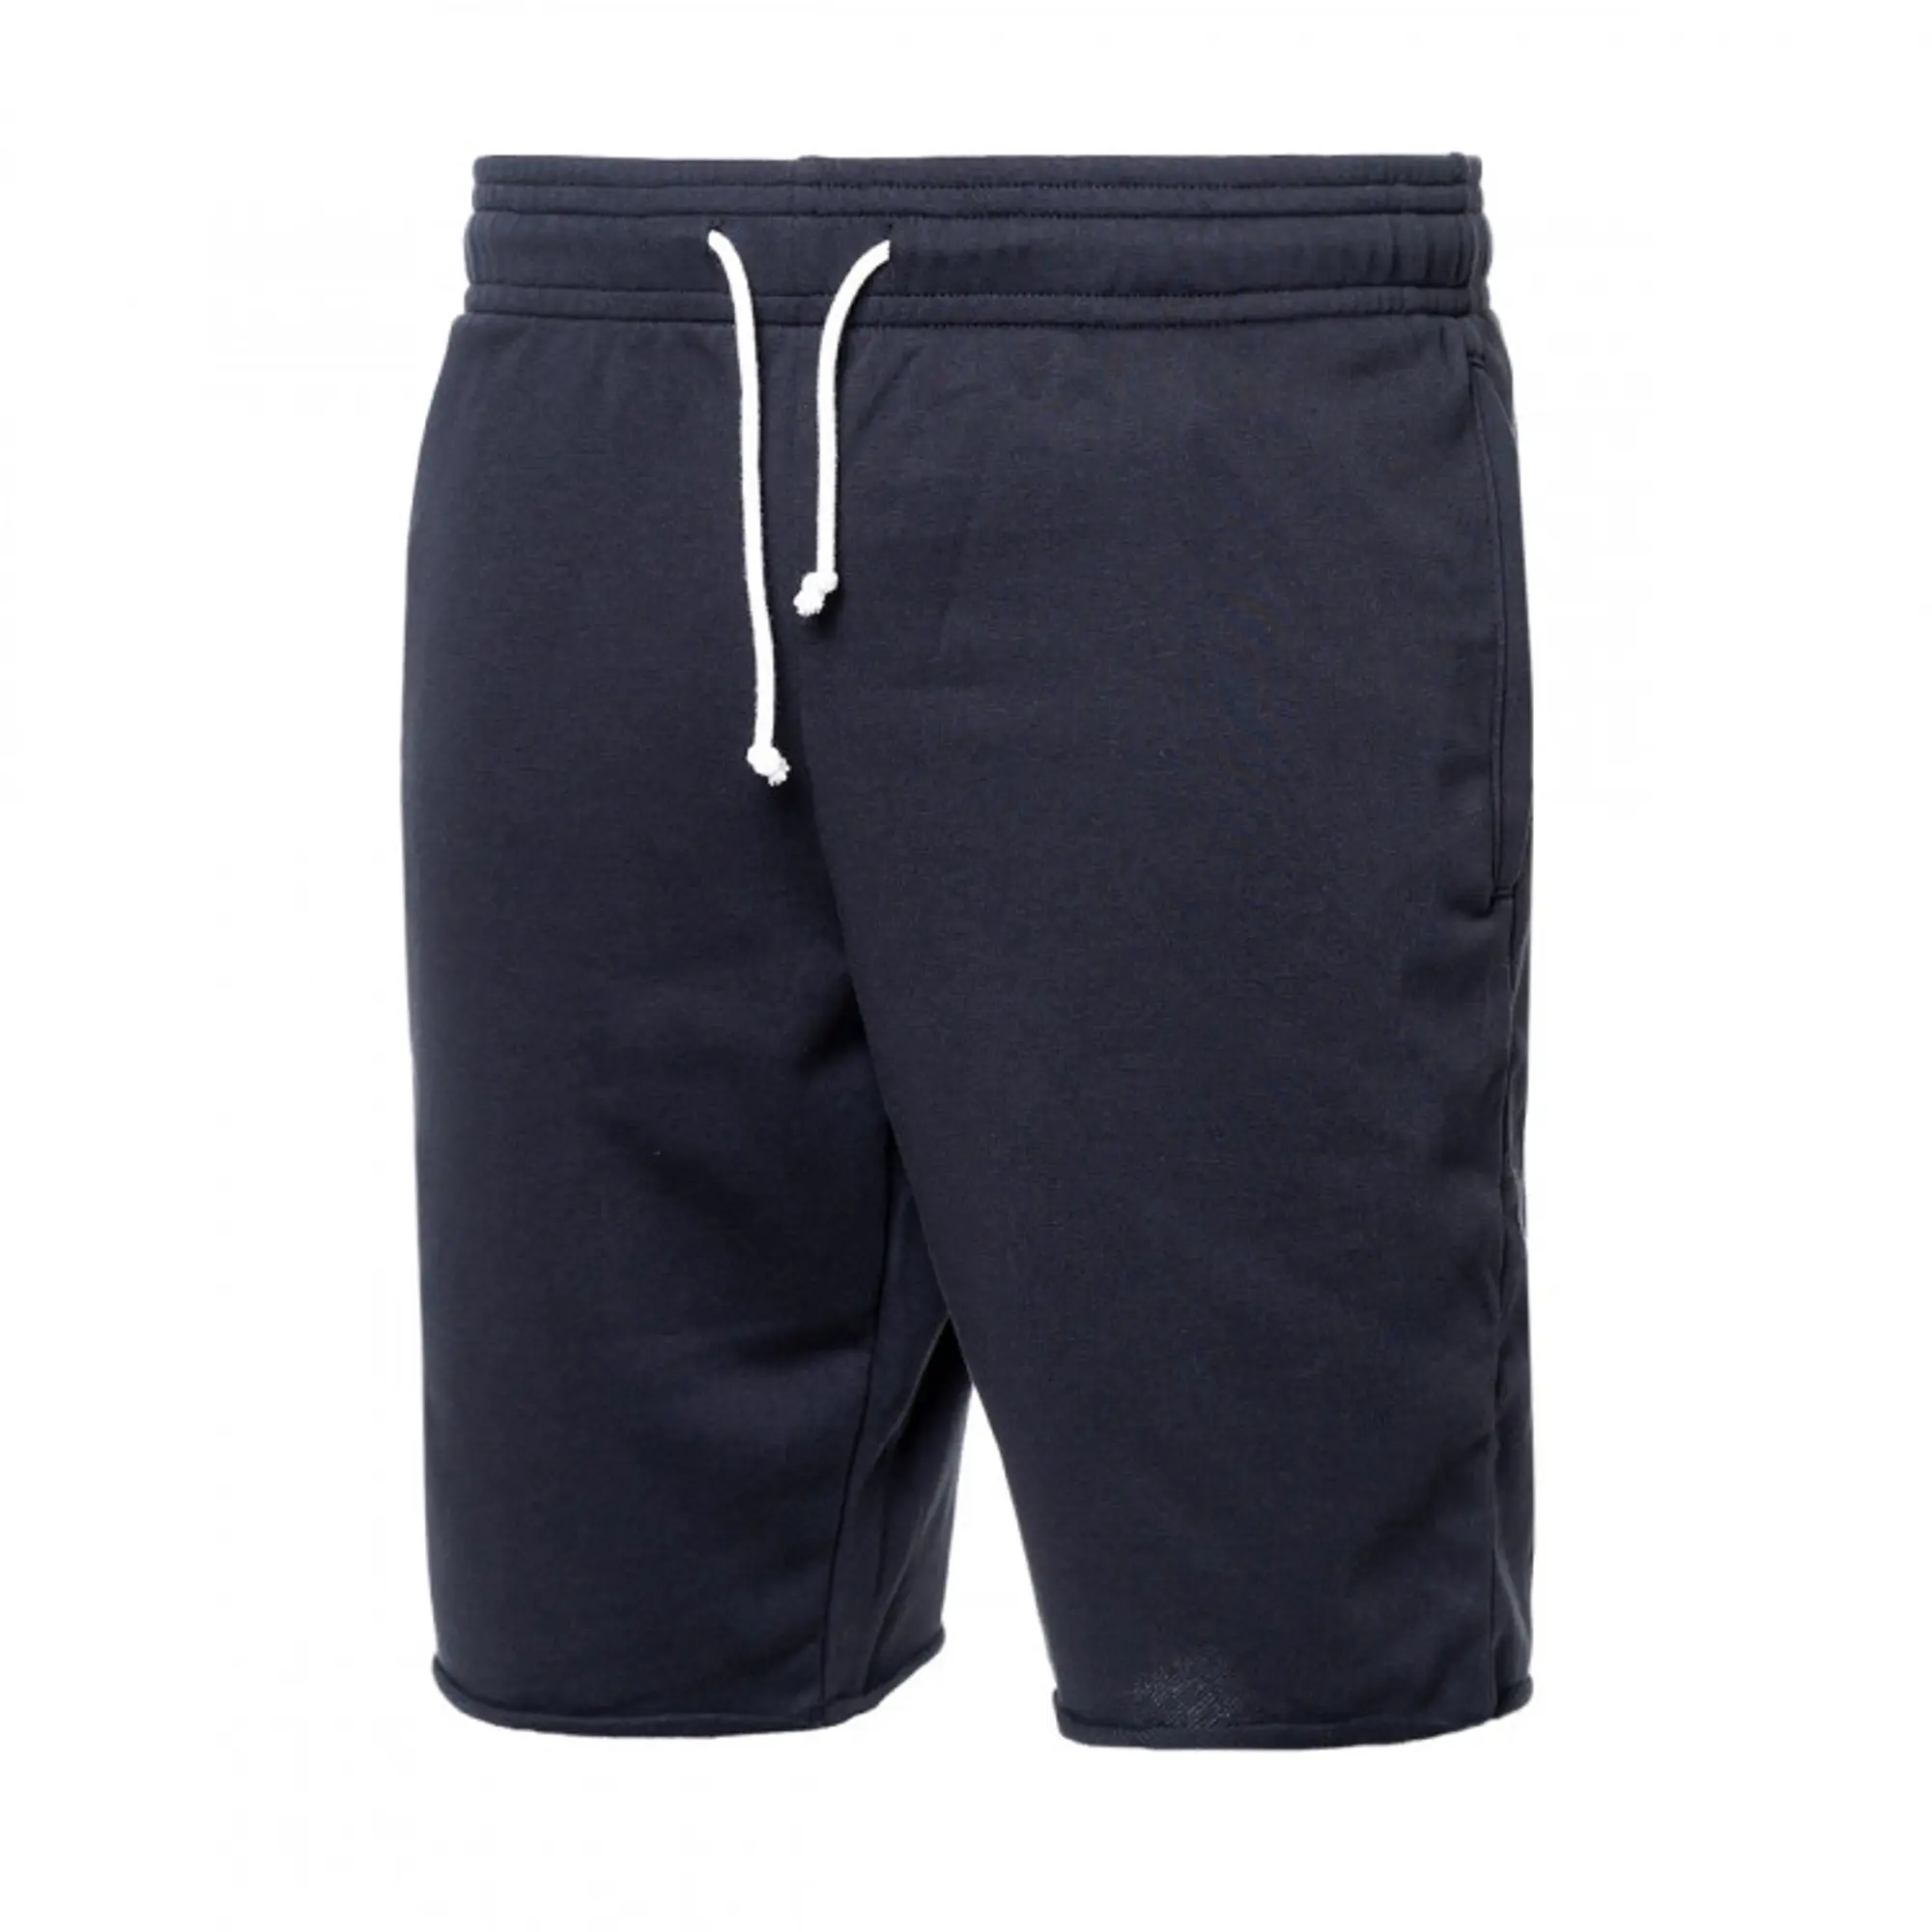 Under Armour Rival Terry Short Black/ Onyx White